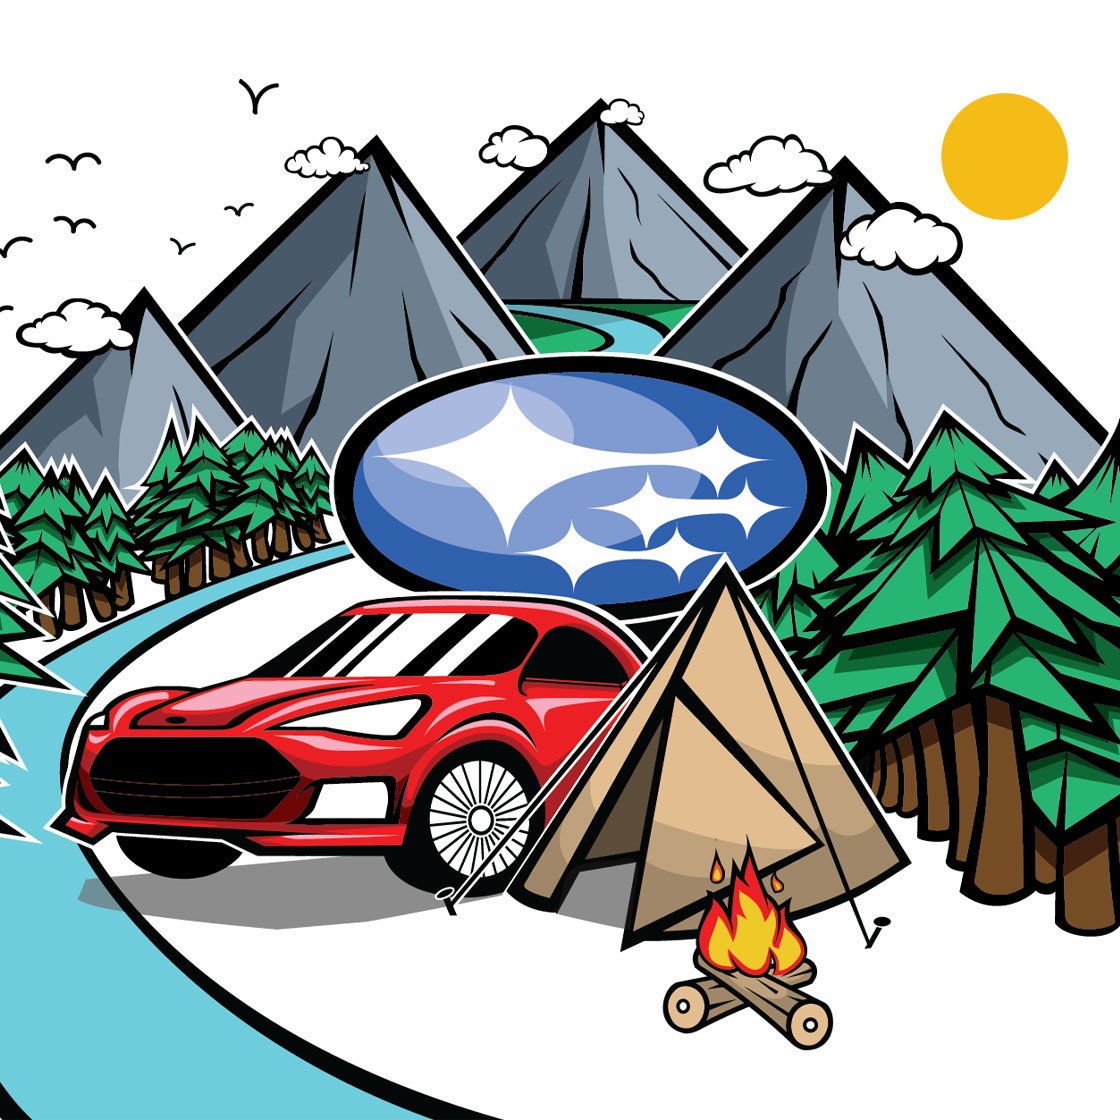 A graphic digital illustration of a car in front of mountains